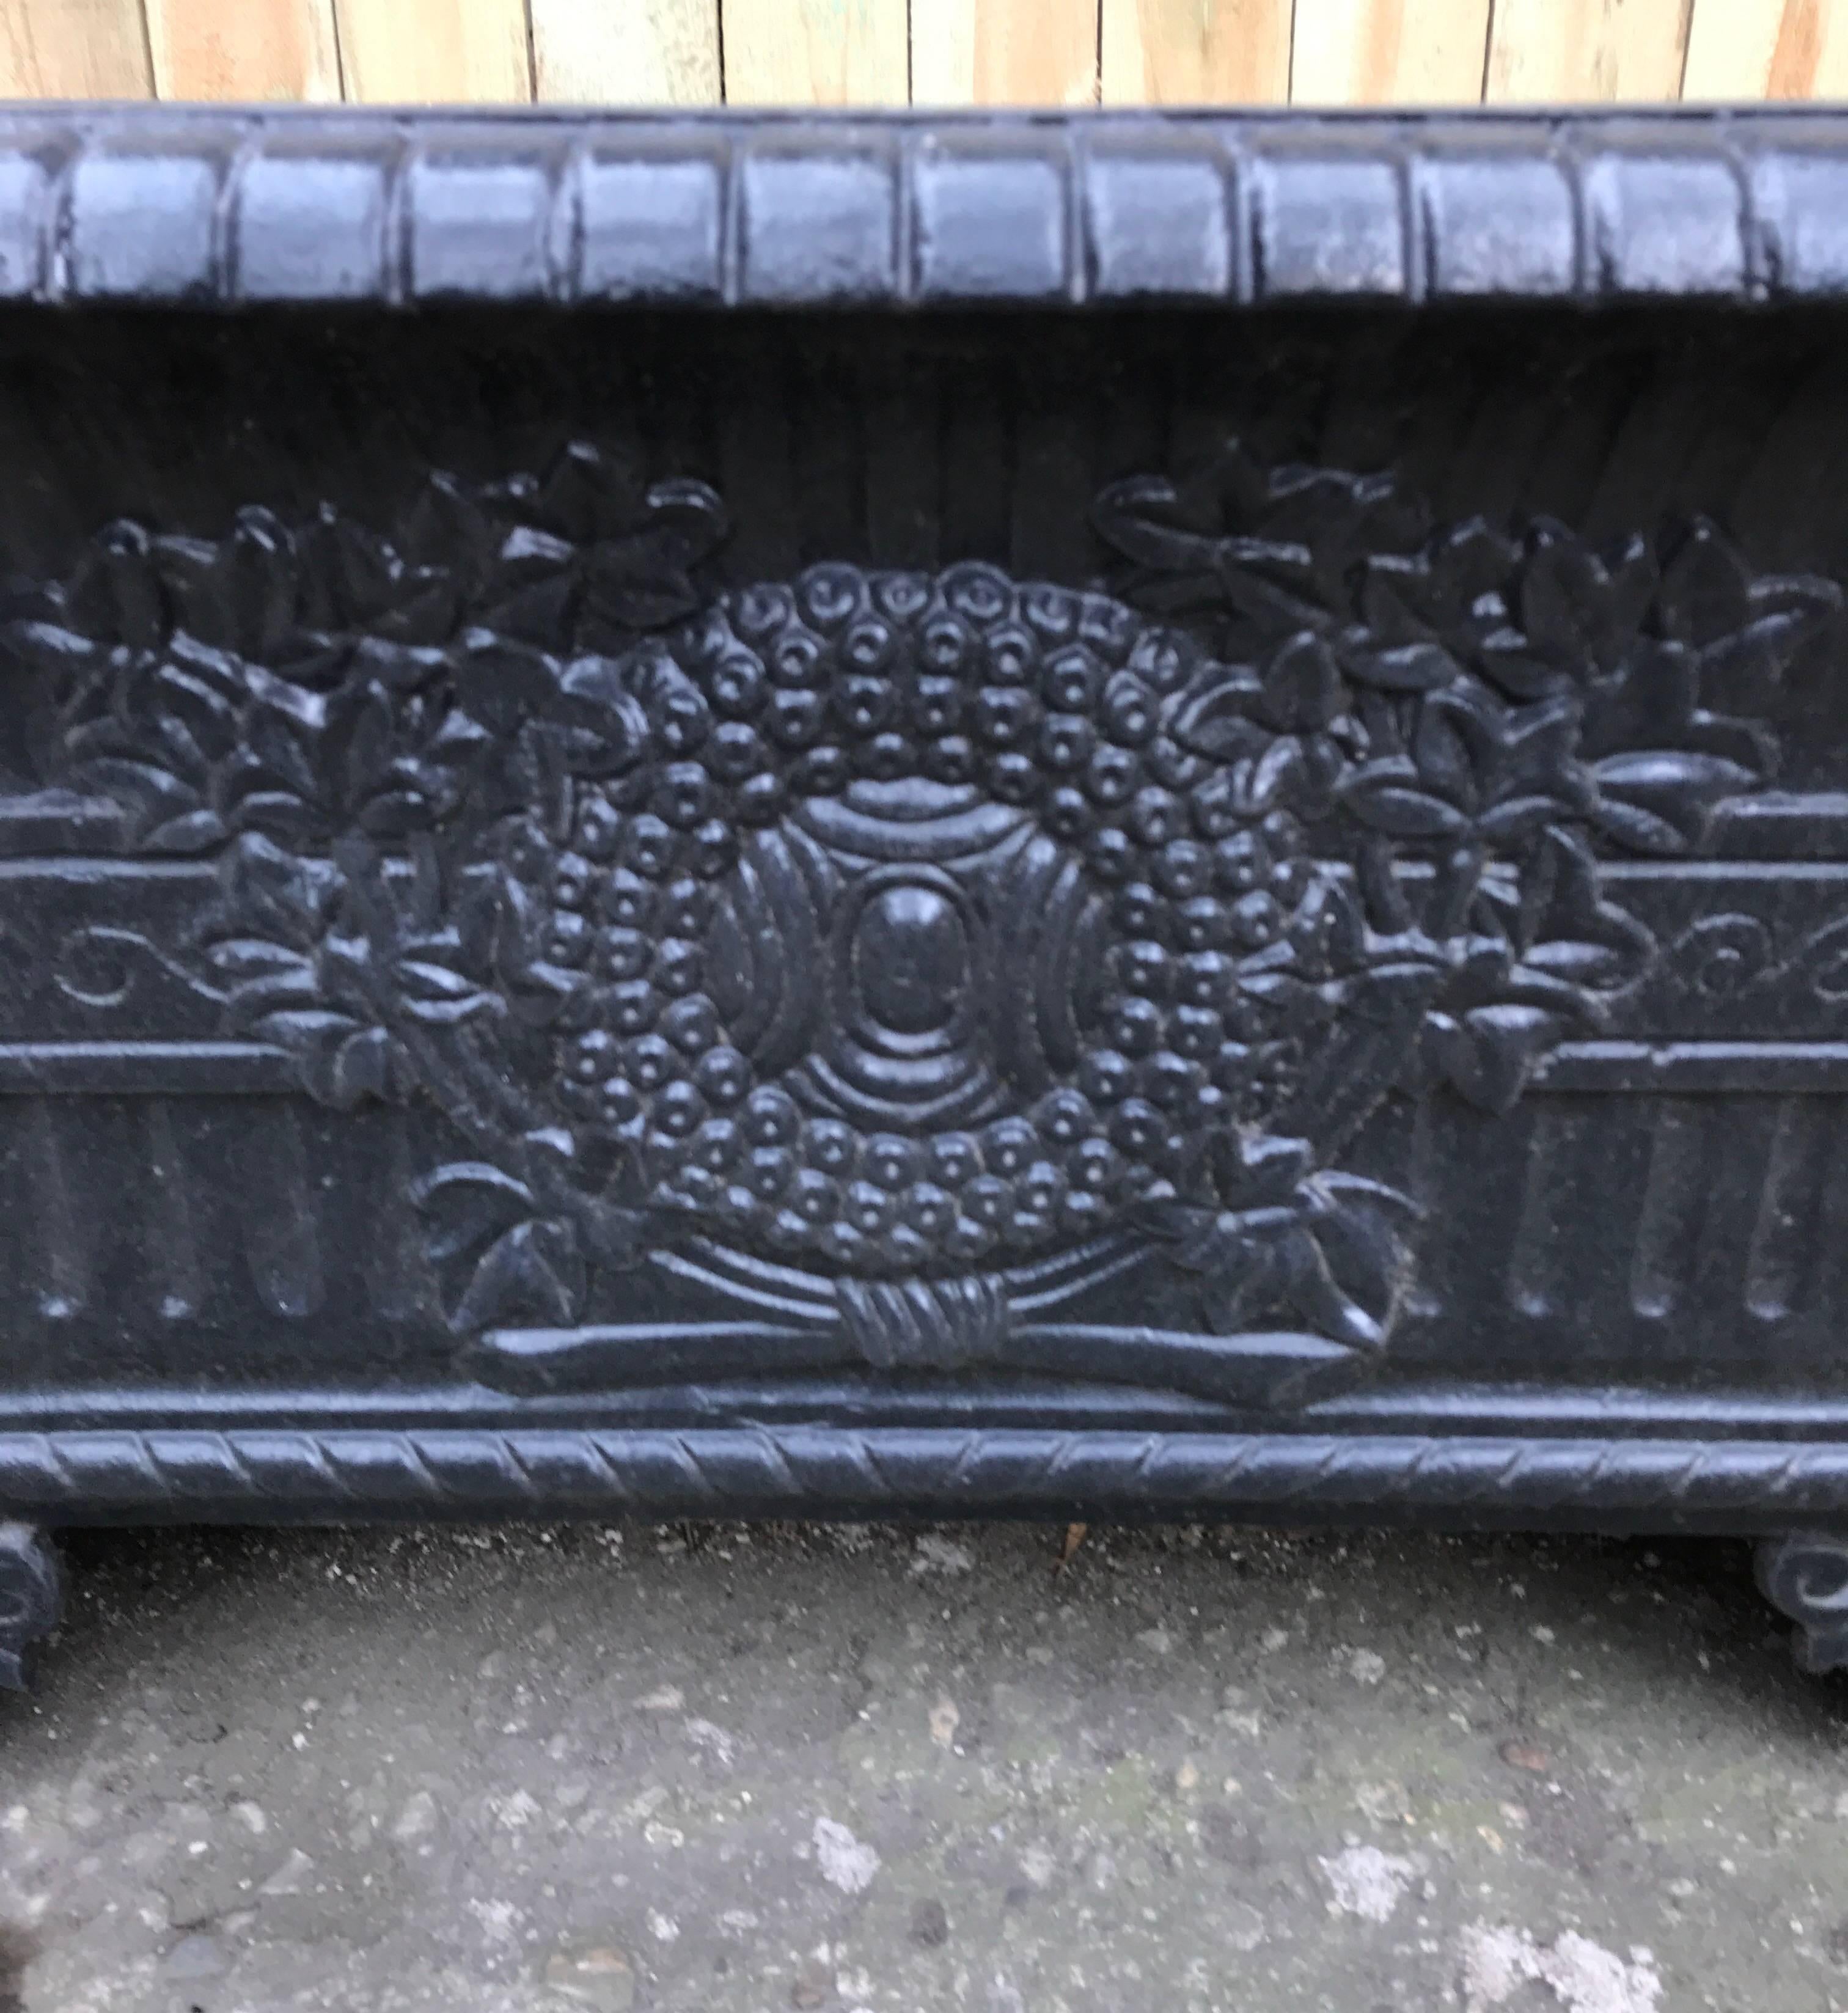 A 19th century French cast iron rectangular planter or jardinière with classical high relief decoration.
Supported on splayed Acanthus leaf decorative bracketed feet on each corner. Wonderful decorative
garden element.